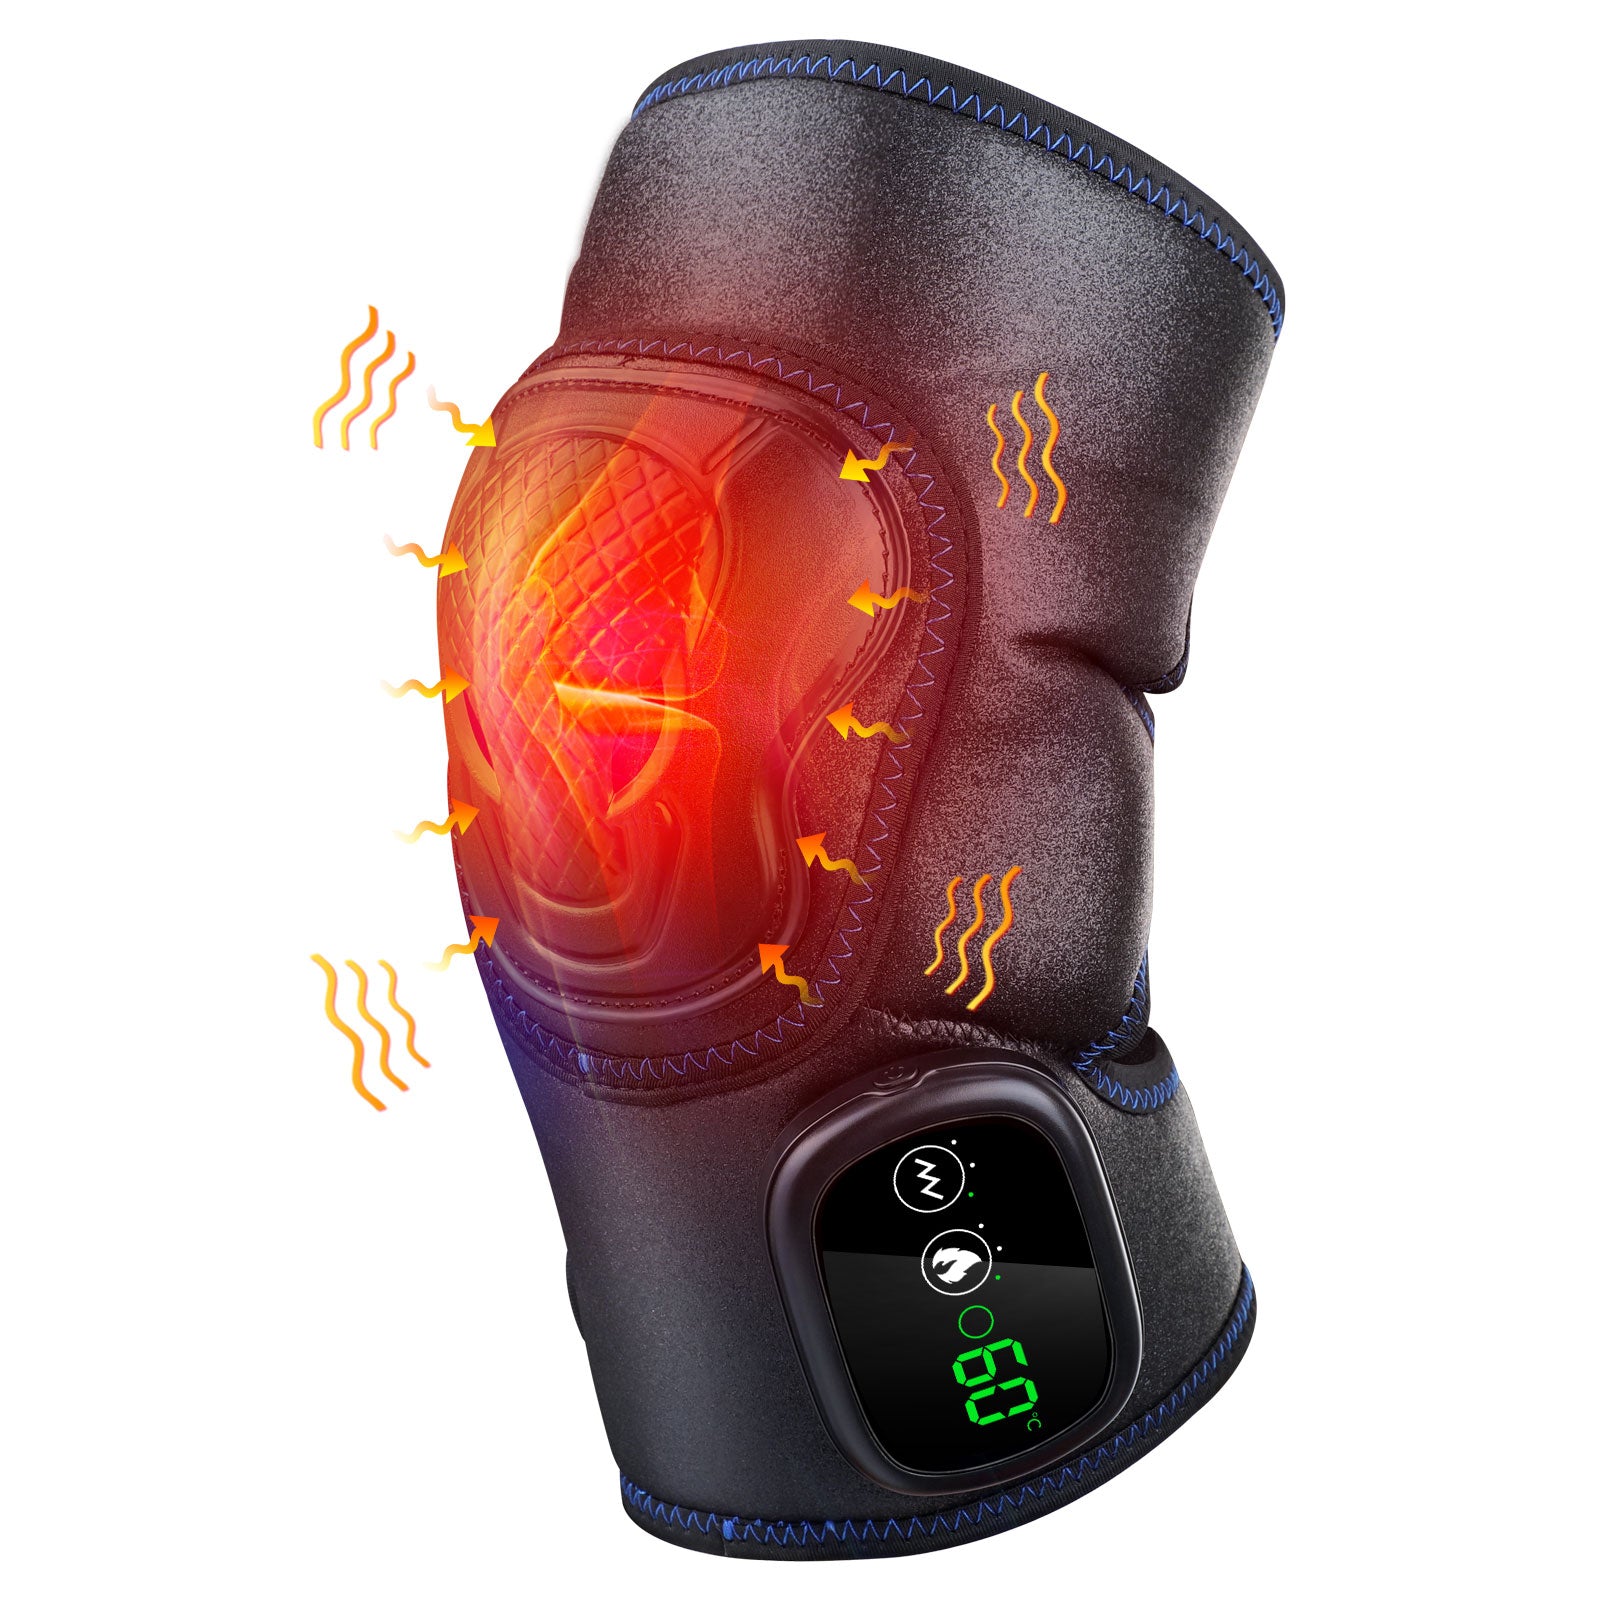 Heat Therapy Knee Massager Relieve Arthritis Pain Knee Joint Brace Support Vibration High Frequency Foot Leg Massage Relaxation.